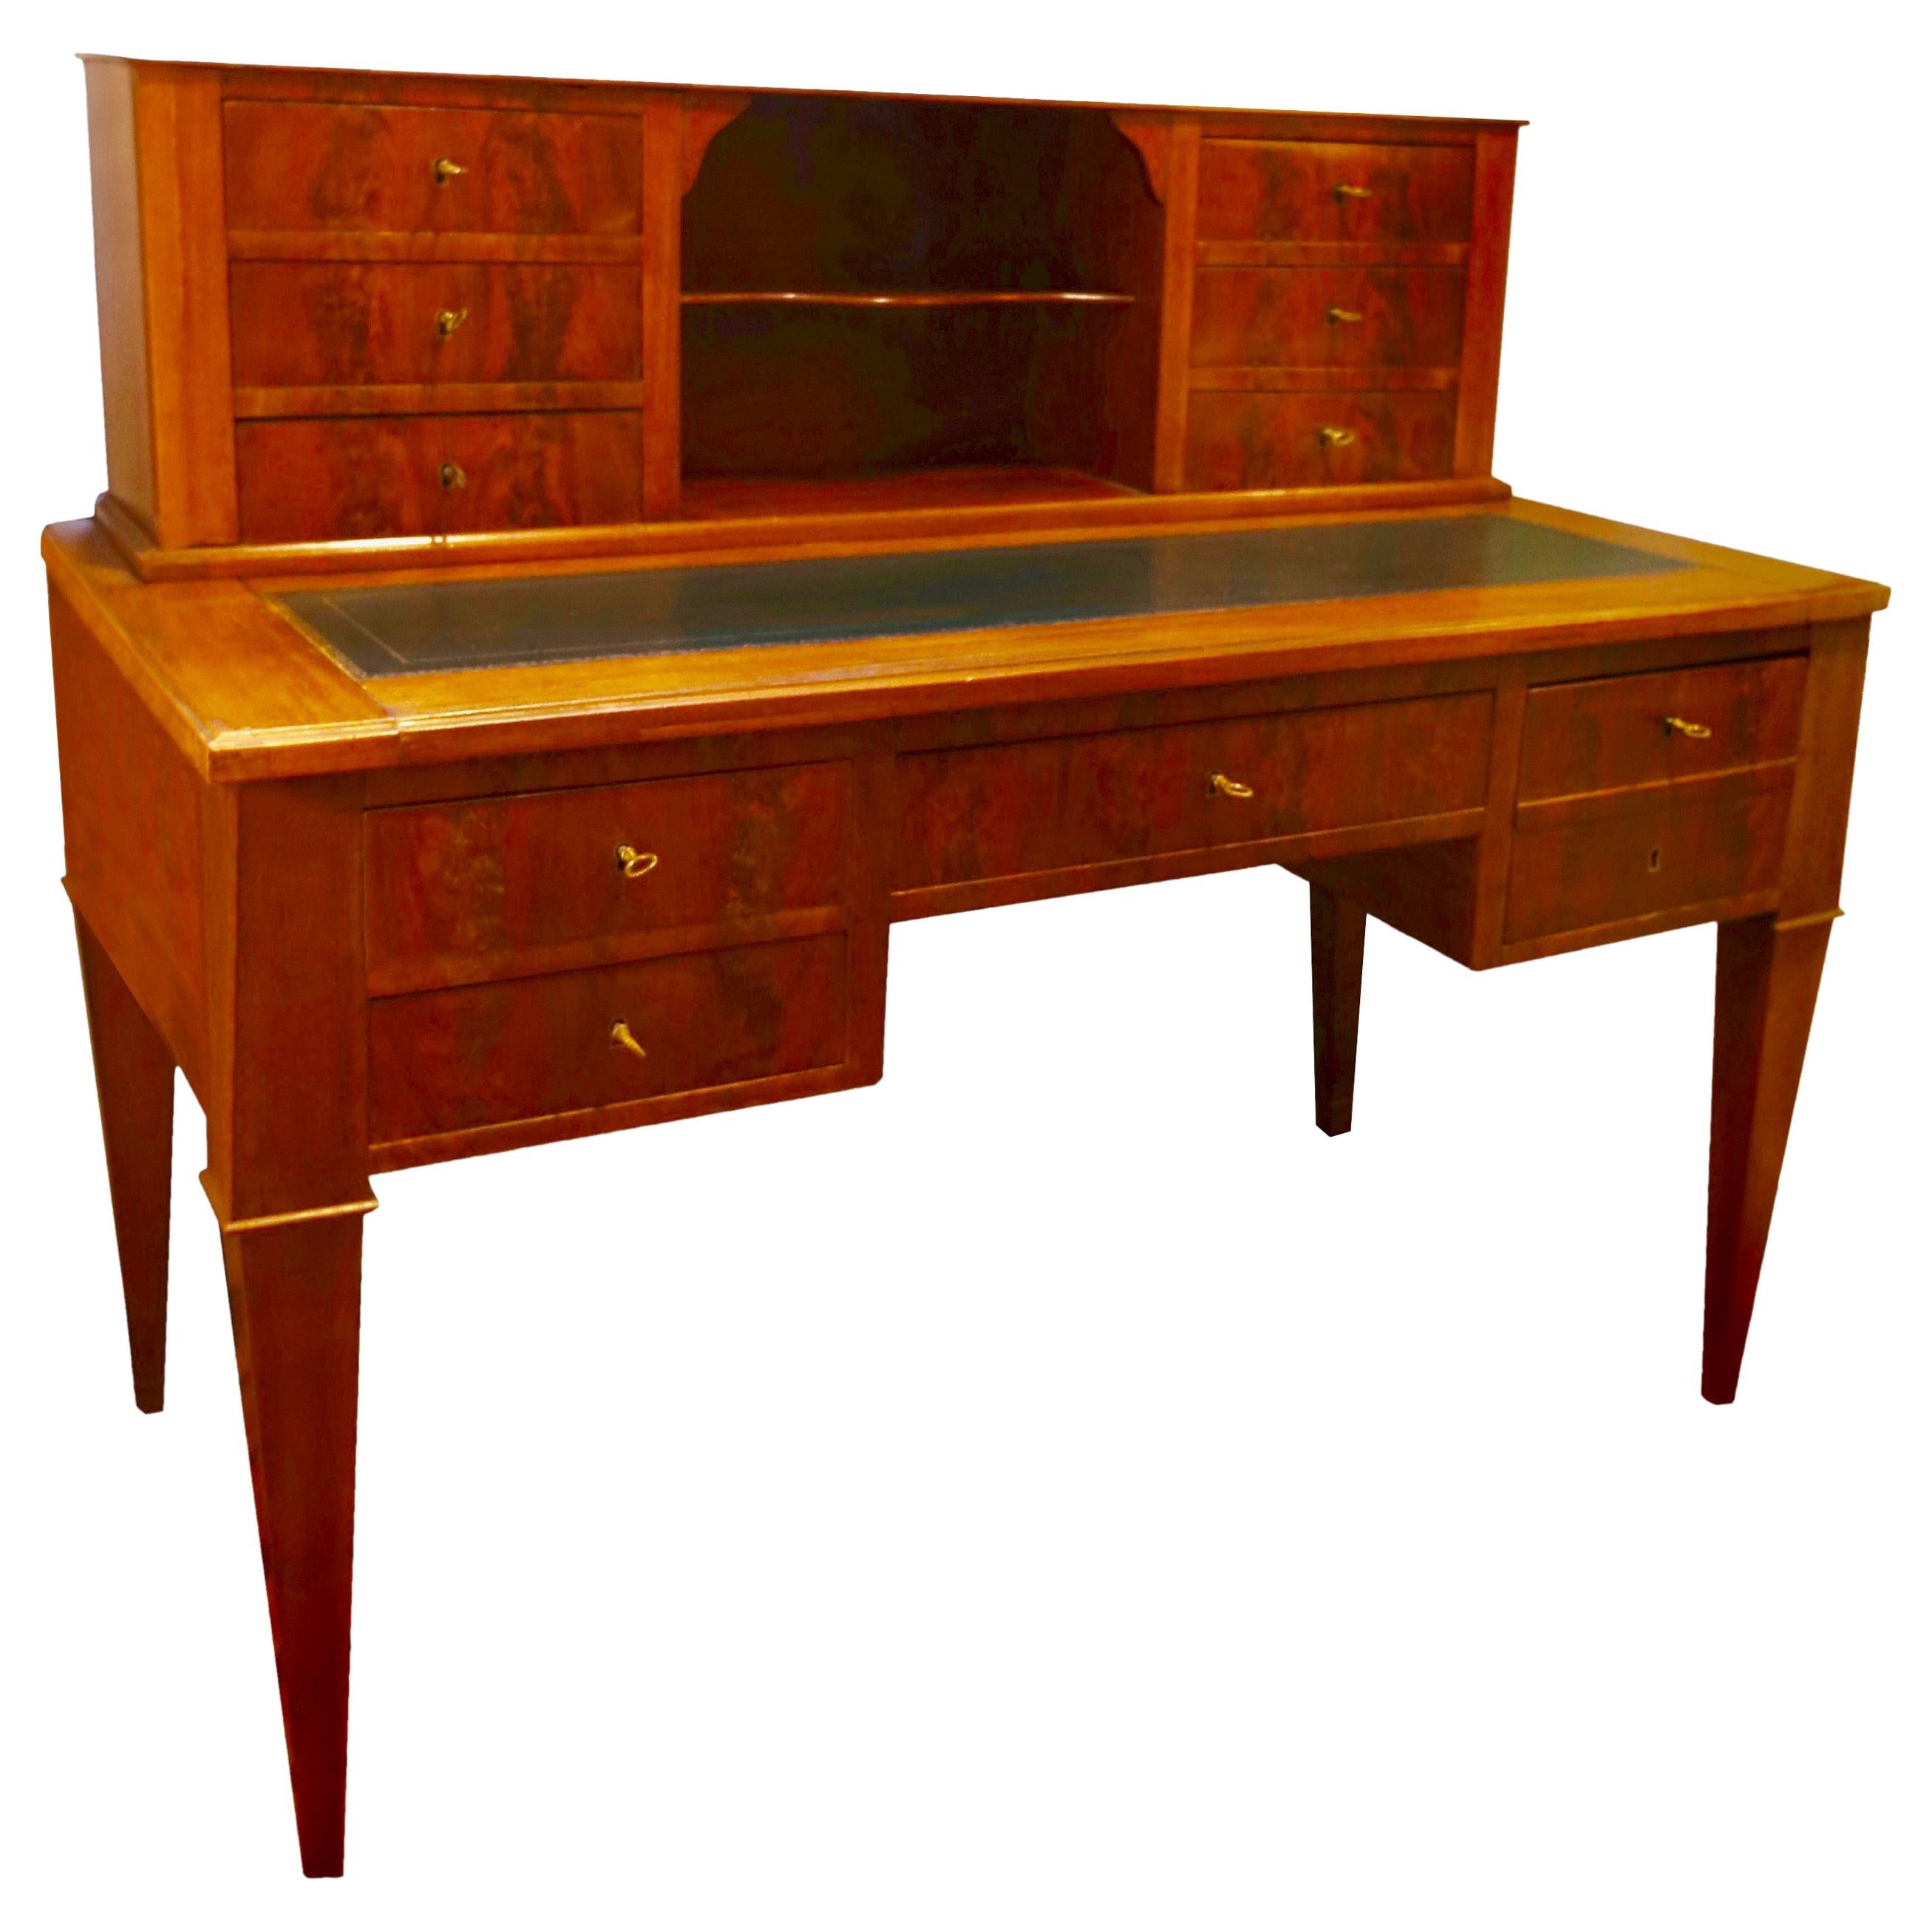 Important French Mahogany "Directoire" Desk with Secret Drawer, mid-19th Century For Sale